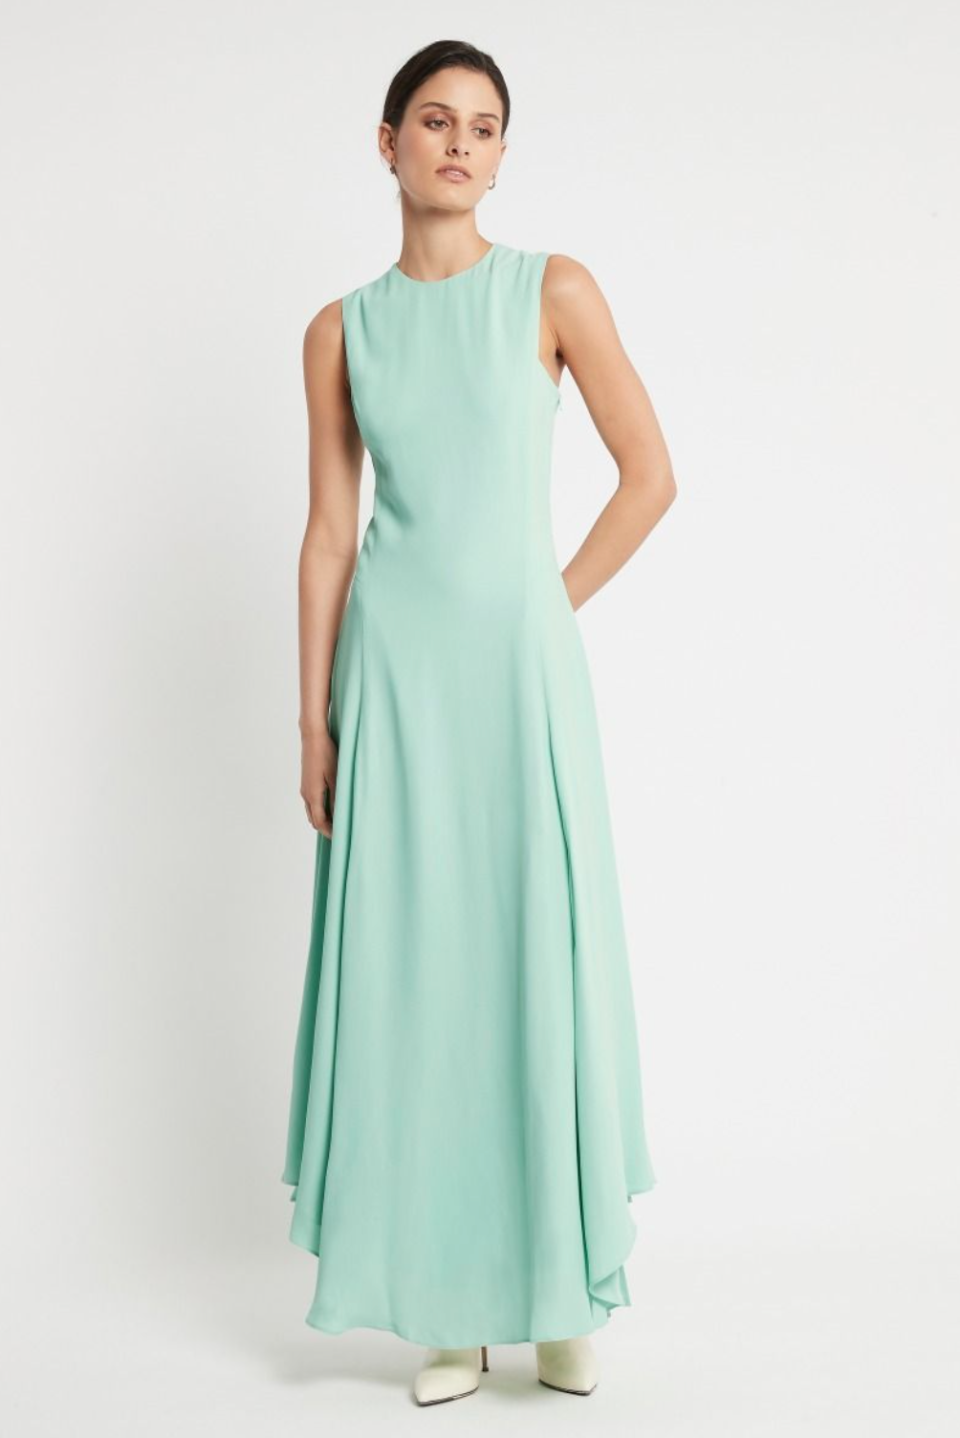 A model wears a long sleeveless gown with flared skirt in mint green, against a white background. She has one hand behind her back and is looking away from the camera.